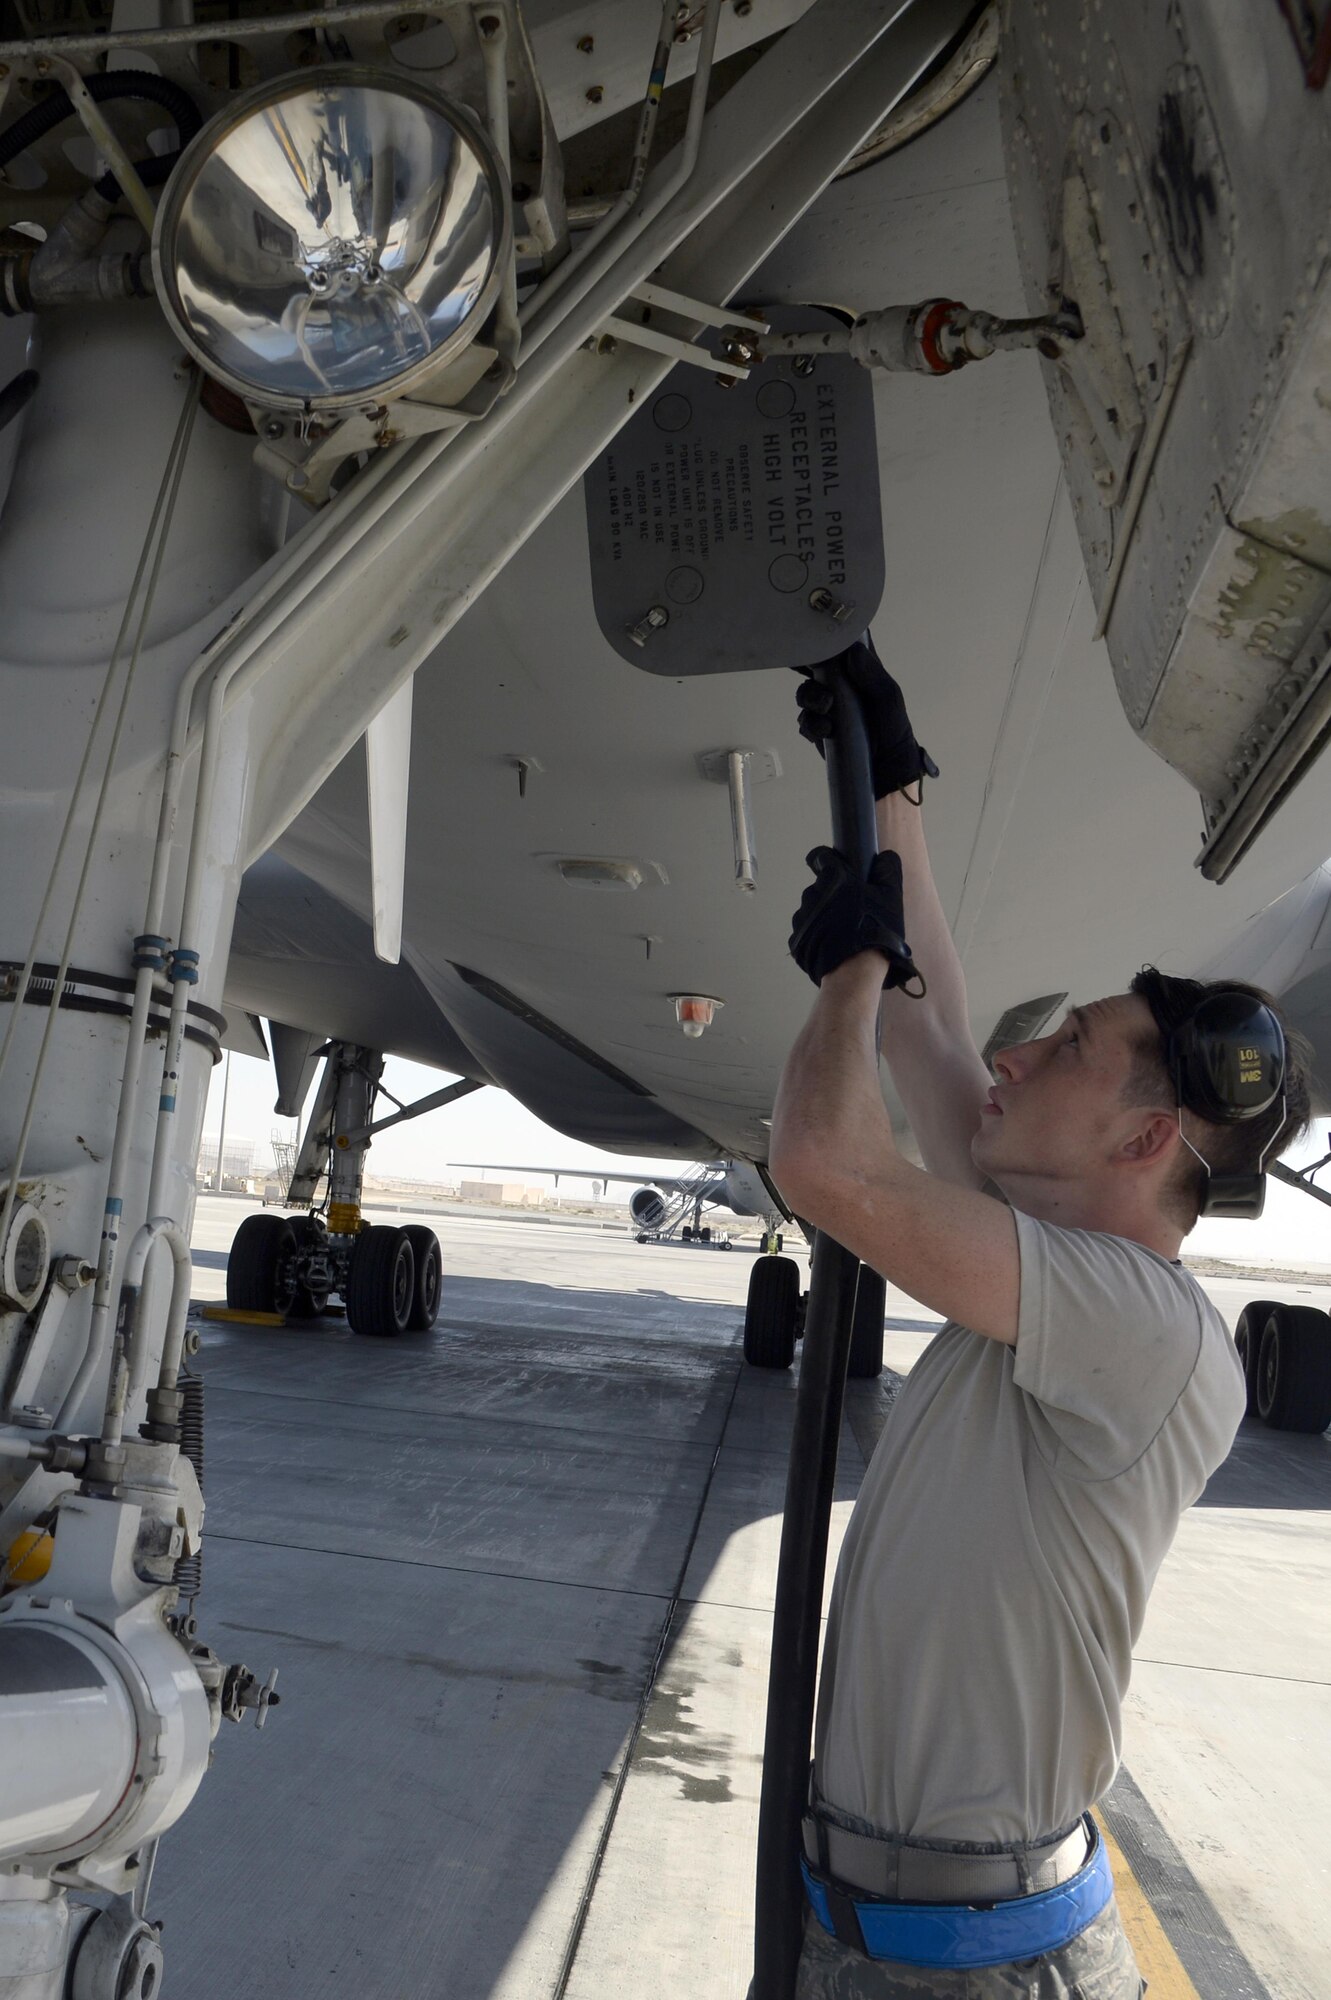 Senior Airman Will, KC-10 Extender instrument and flight control systems technician, connects a power cable from a generator to a KC-10 Extender at an undisclosed location in Southwest Asia Feb. 2, 2015. Specialists consist of hydraulics, electrical-environmental, jet engine, instrument and flight control systems and communication/navigation shops that perform the specialized maintenance required to keep the Extender in the air. Will is deployed from Travis Air Force Base, Calif., and is a native of Glendale, Ariz. (U.S. Air Force photo/Tech. Sgt. Marie Brown)